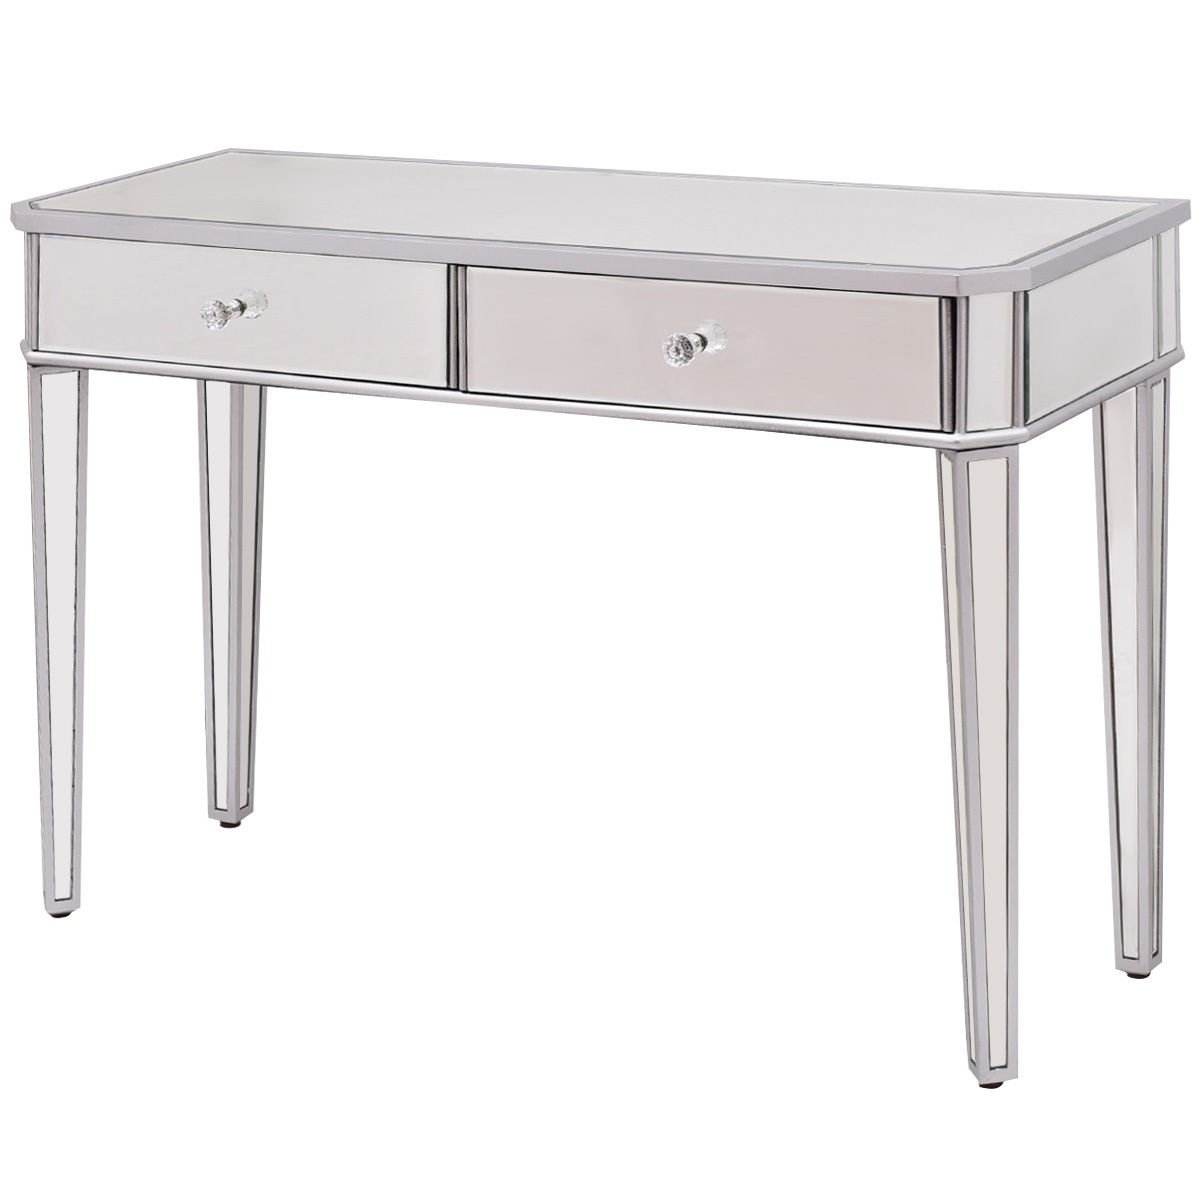 drawer mirrored vanity make desk console dressing accent table silver glass modern for storage kitchen dining small white nightstand chromebook circle coffee pier one outdoor